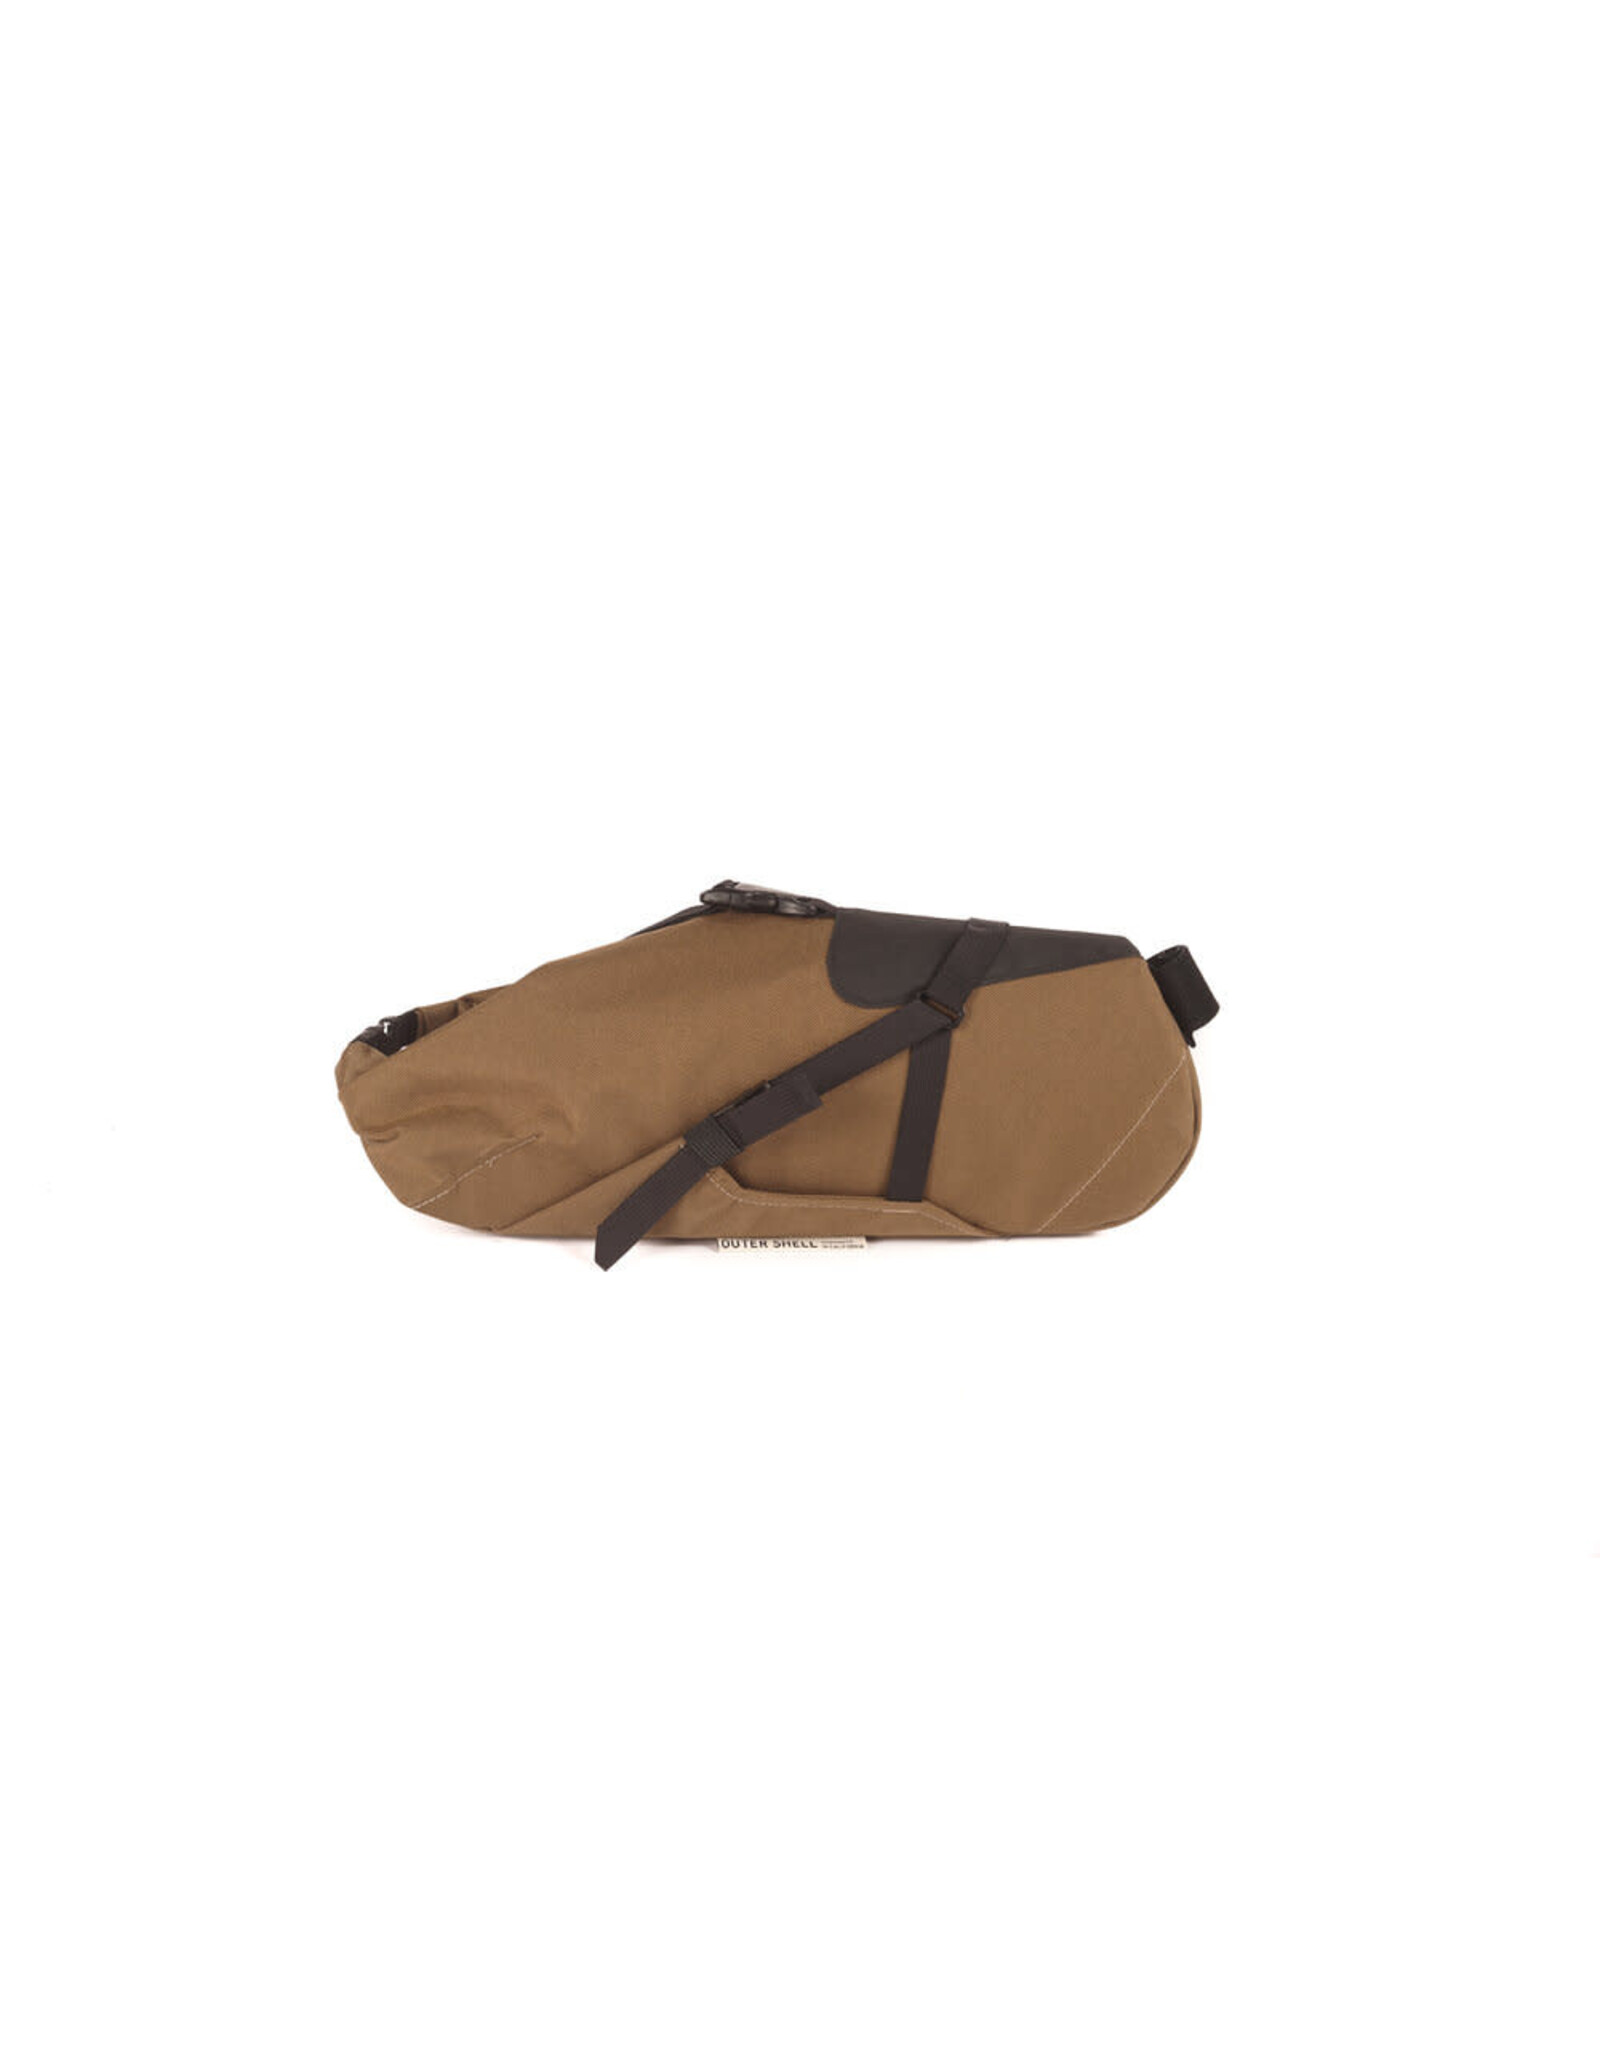 outer shell Expedition Seatpack